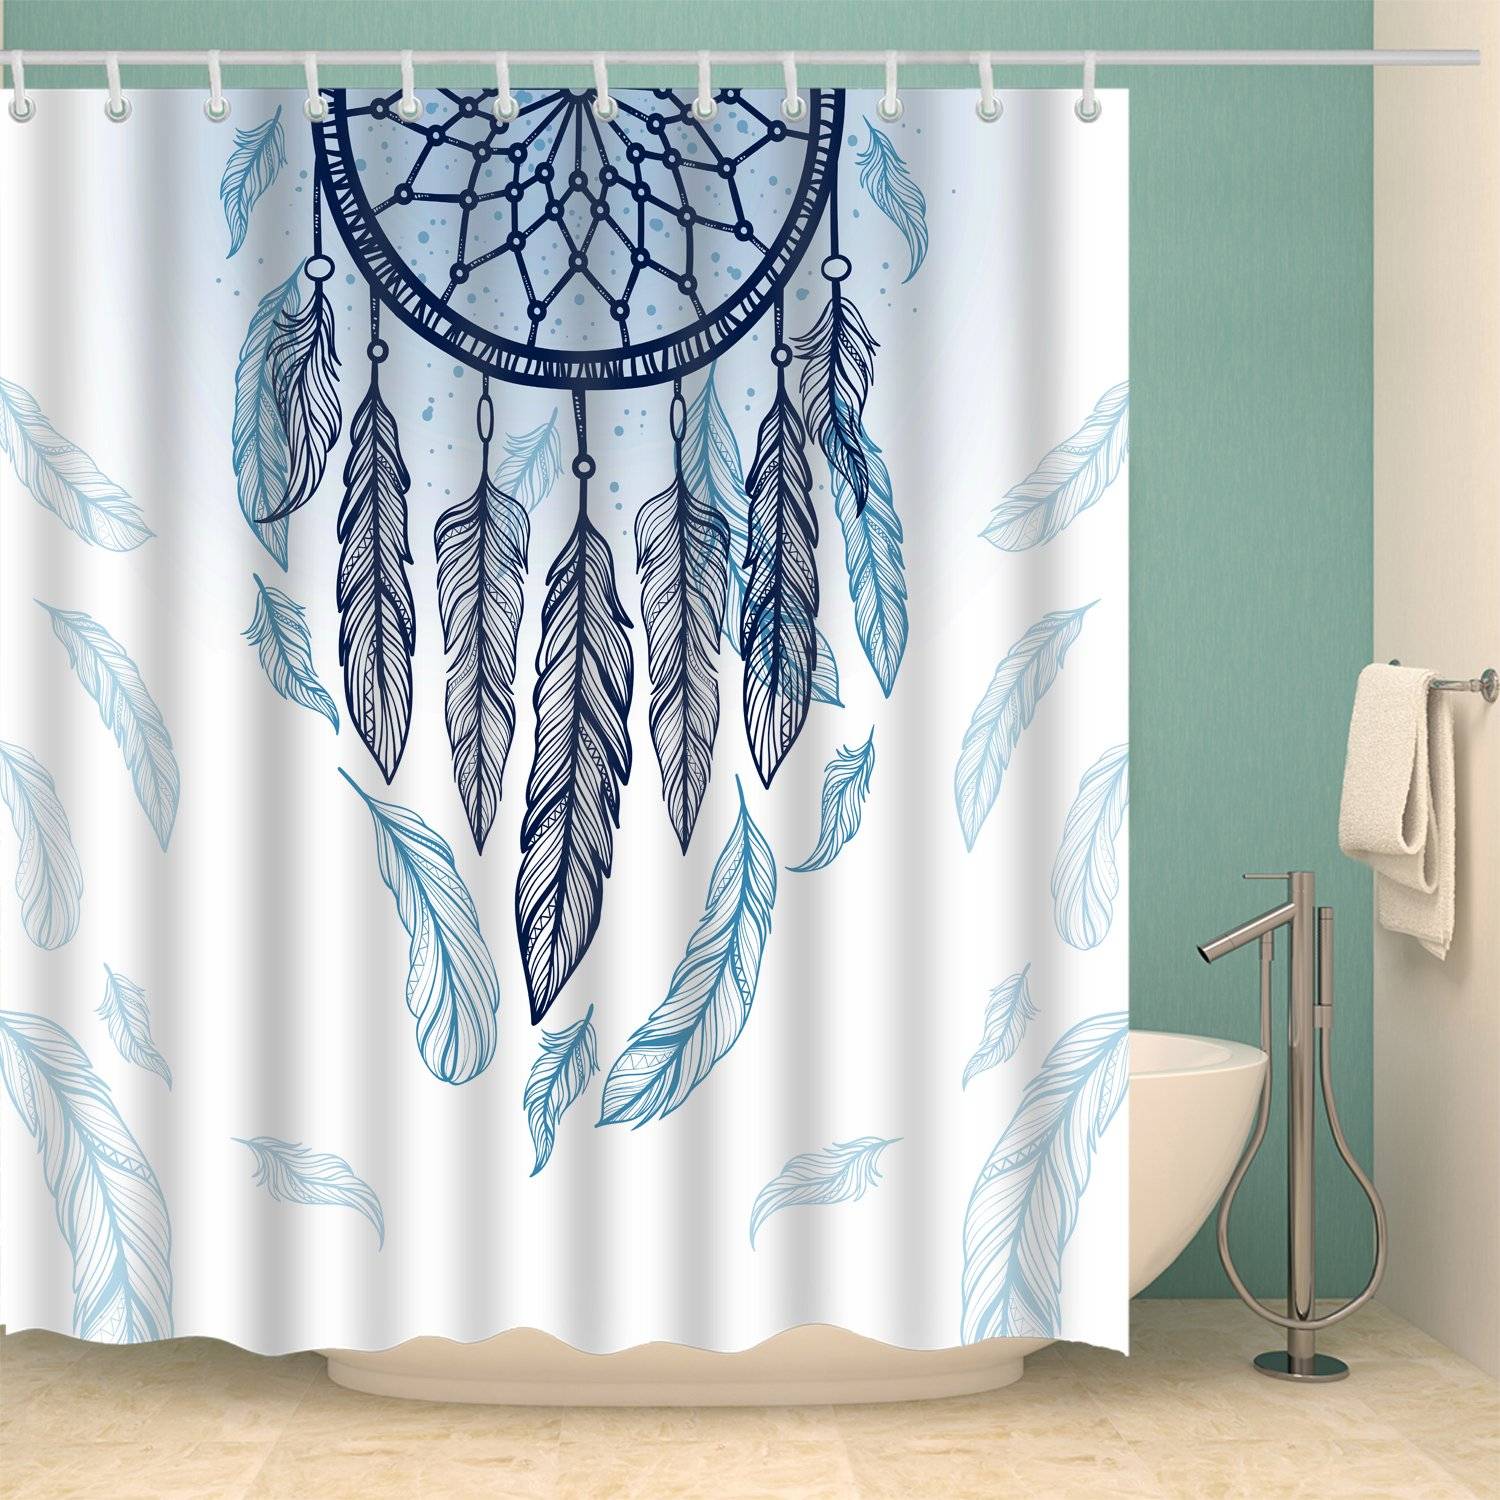 Ethnic Tribal Feathers Blue Dream Catcher Shower Curtain